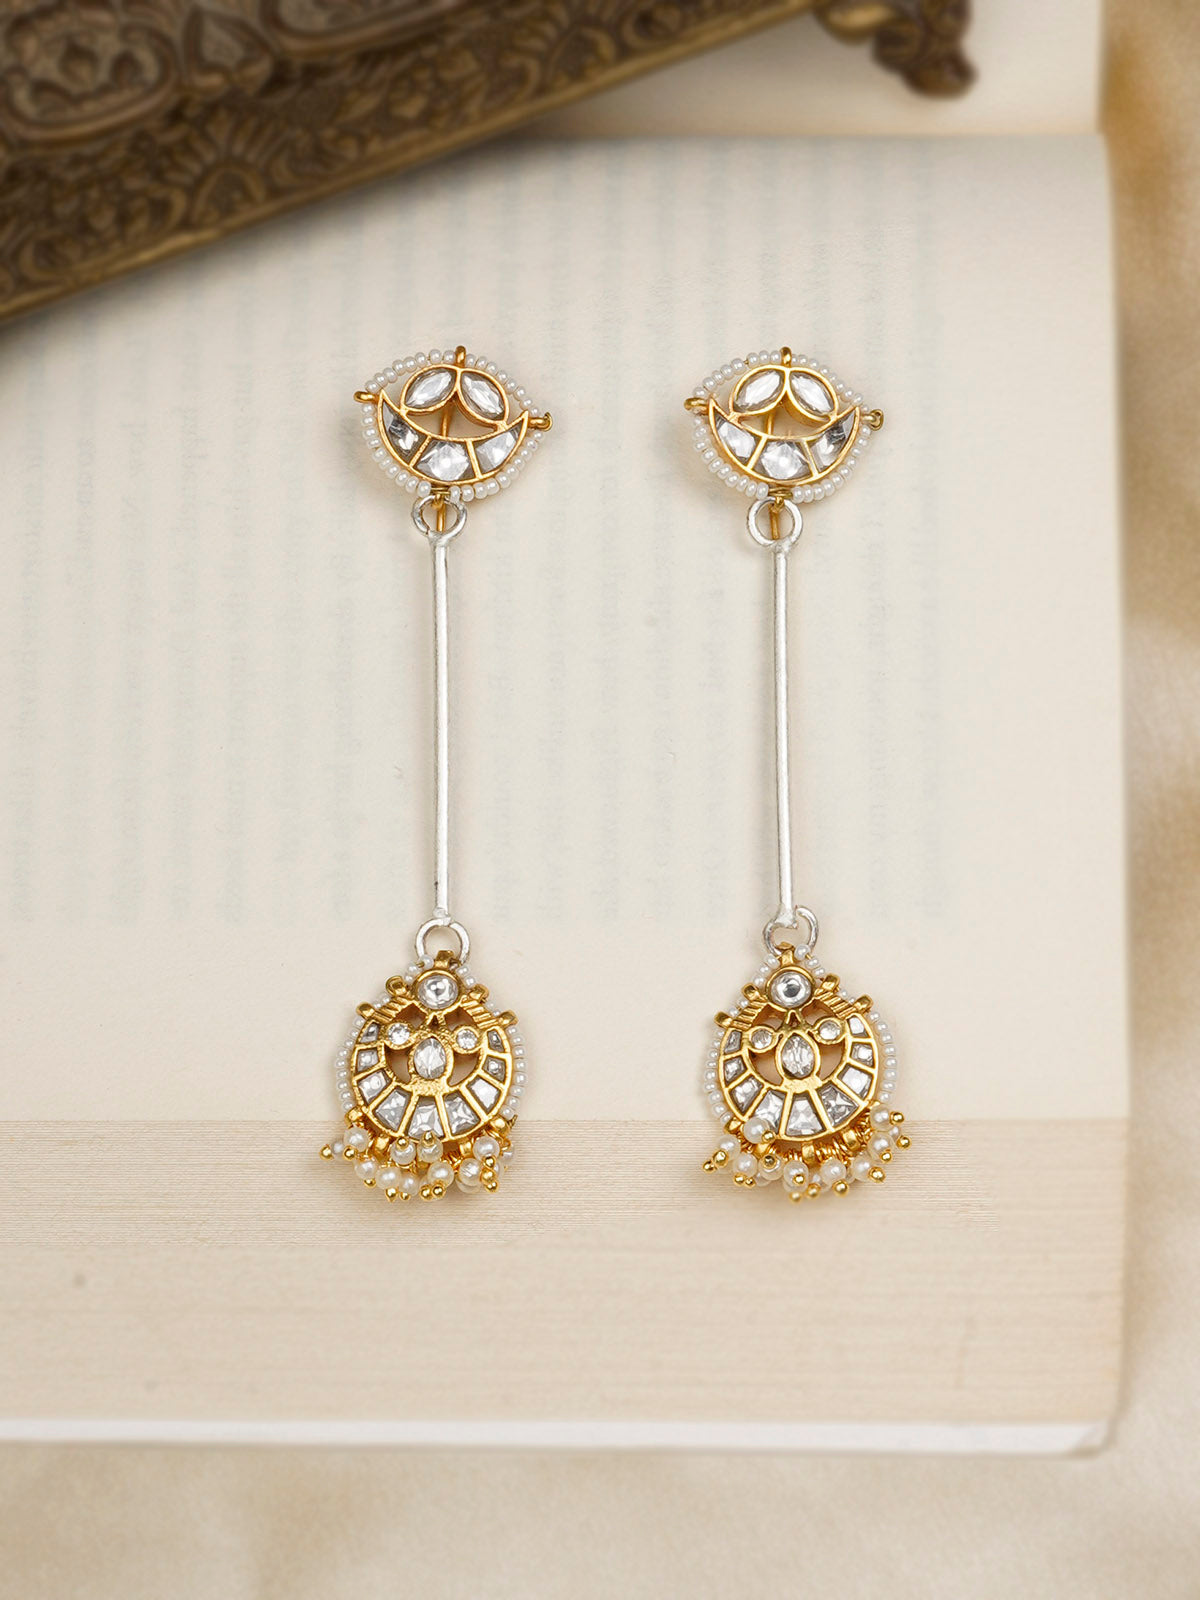 MR-E129W - White Color Gold Plated Mishr Earrings